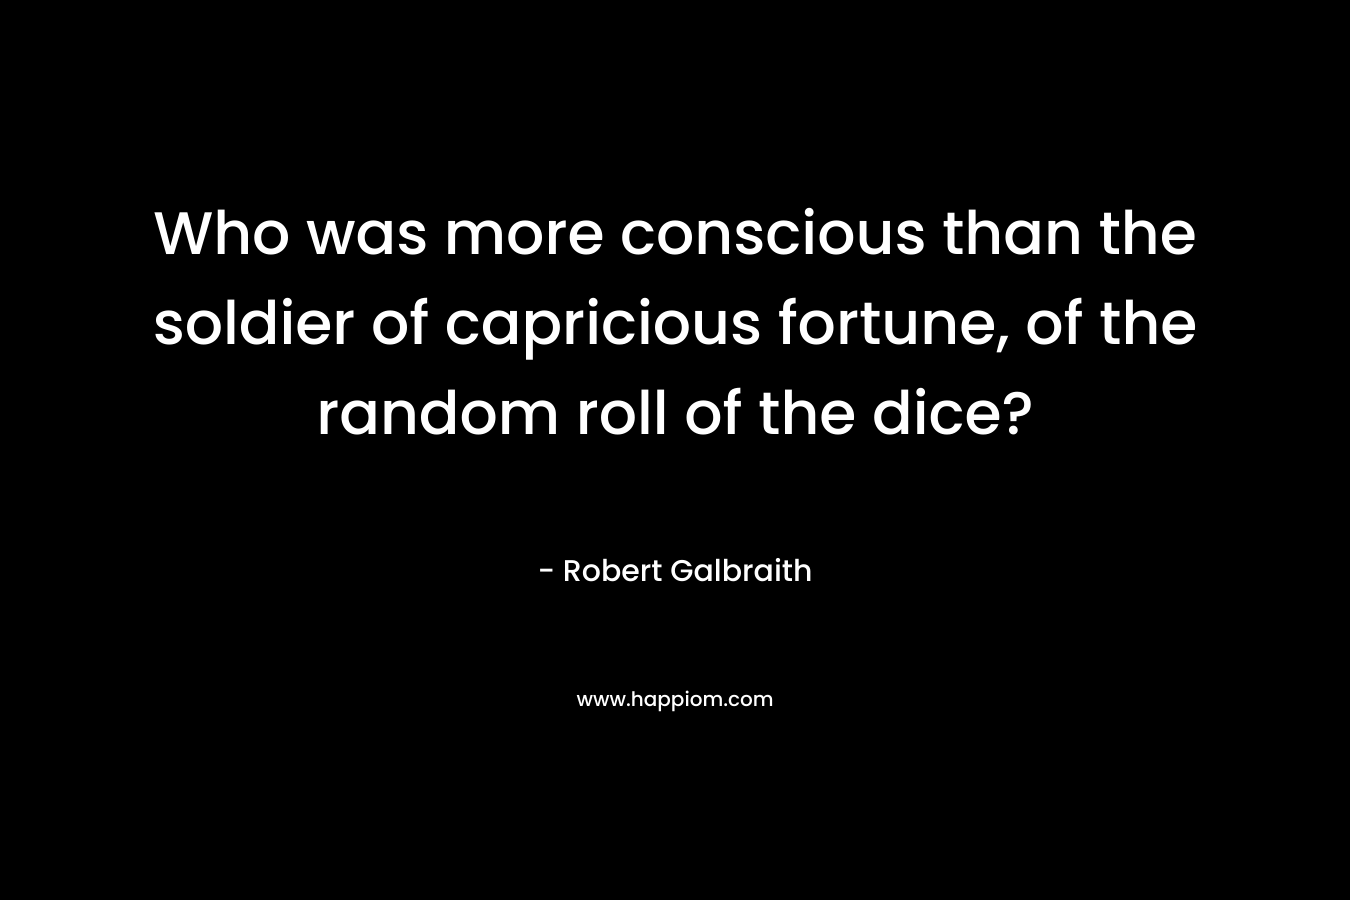 Who was more conscious than the soldier of capricious fortune, of the random roll of the dice?